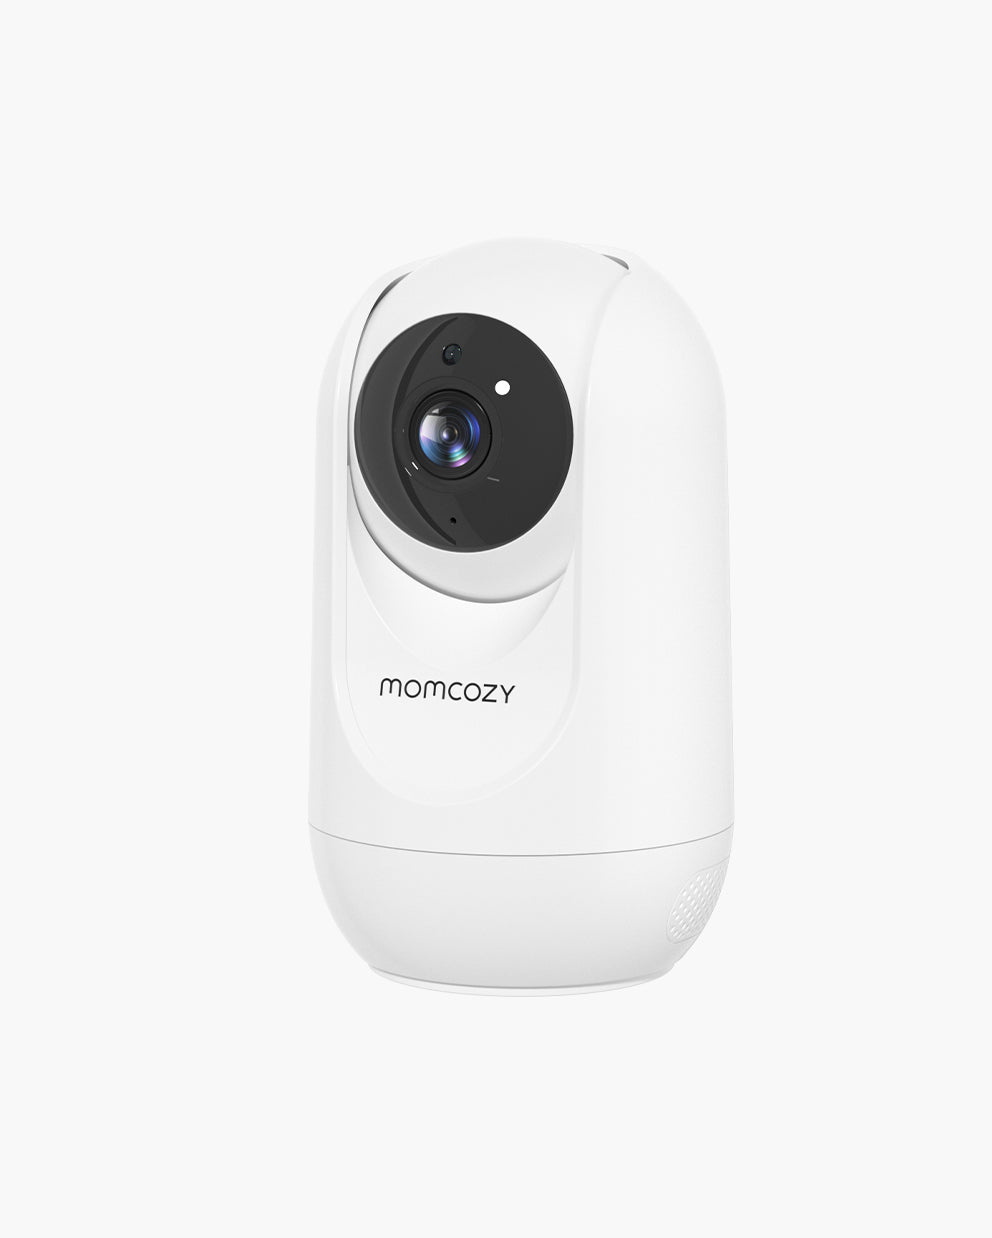 Momcozy Launched Video Baby Monitor to Give Parents Peace of Mind